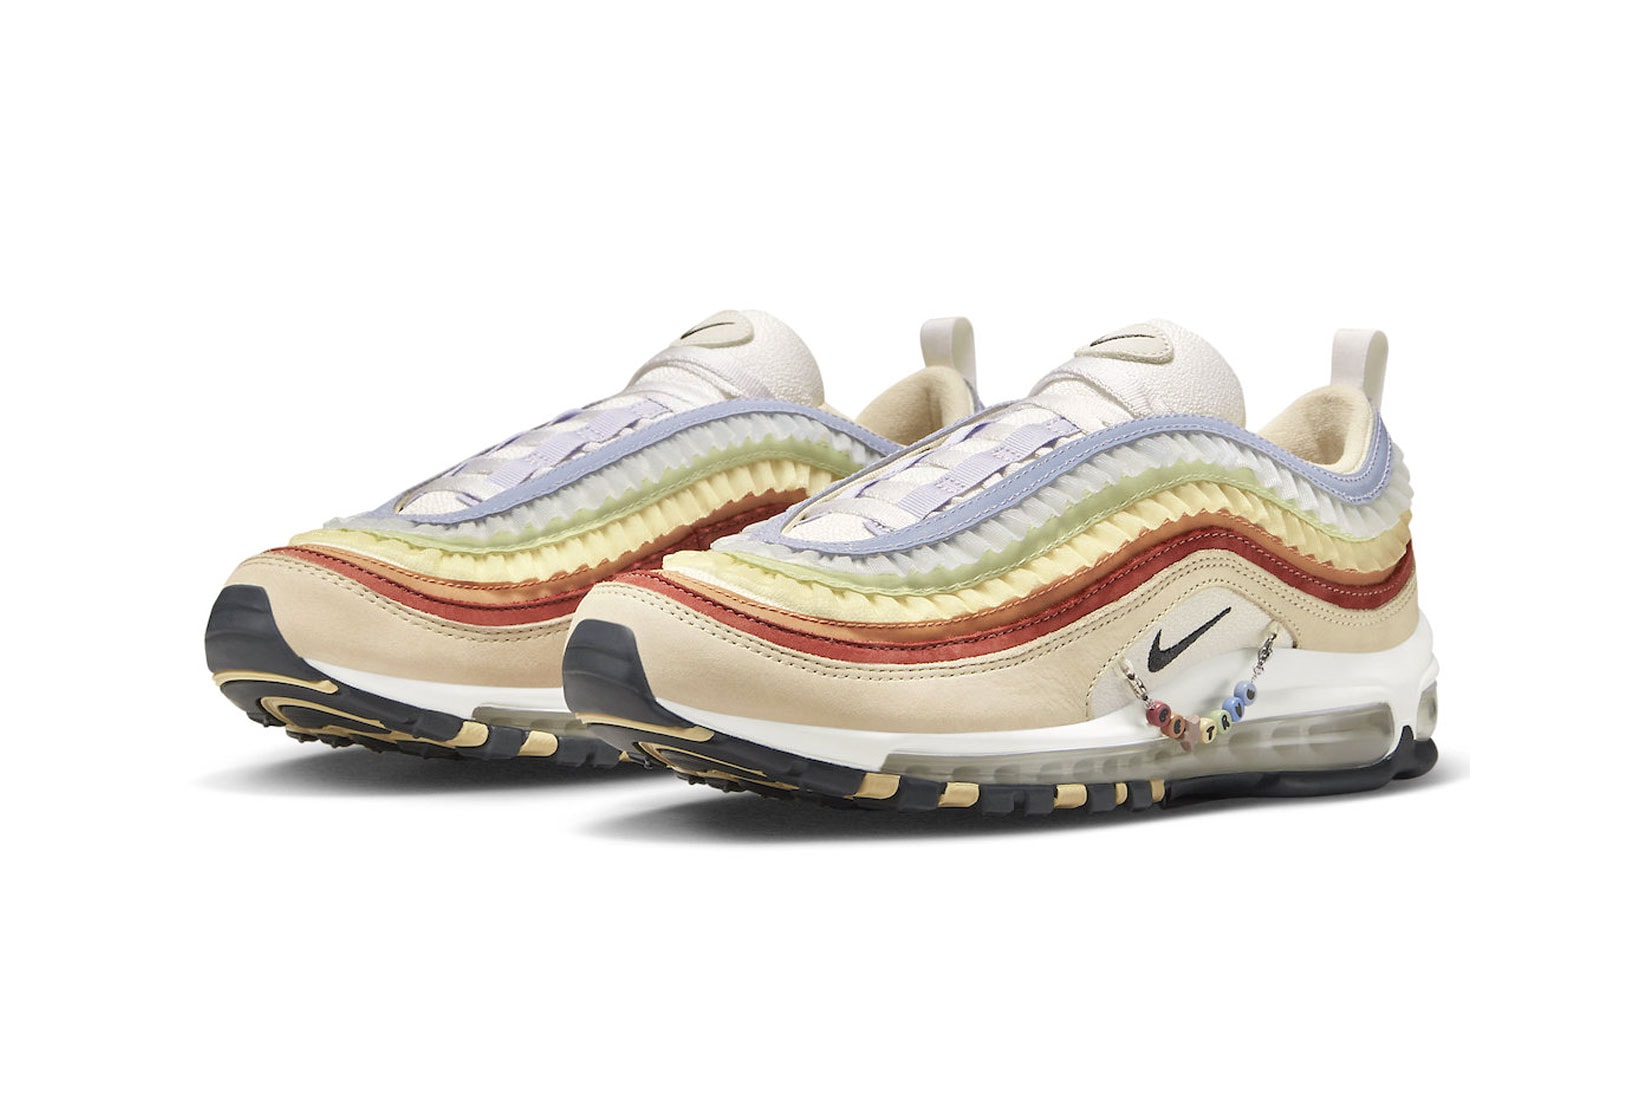 Nike Air Max 97 Be True Removable Charm Bracelet Pink Oxford Anthracite-Adobe Release Images